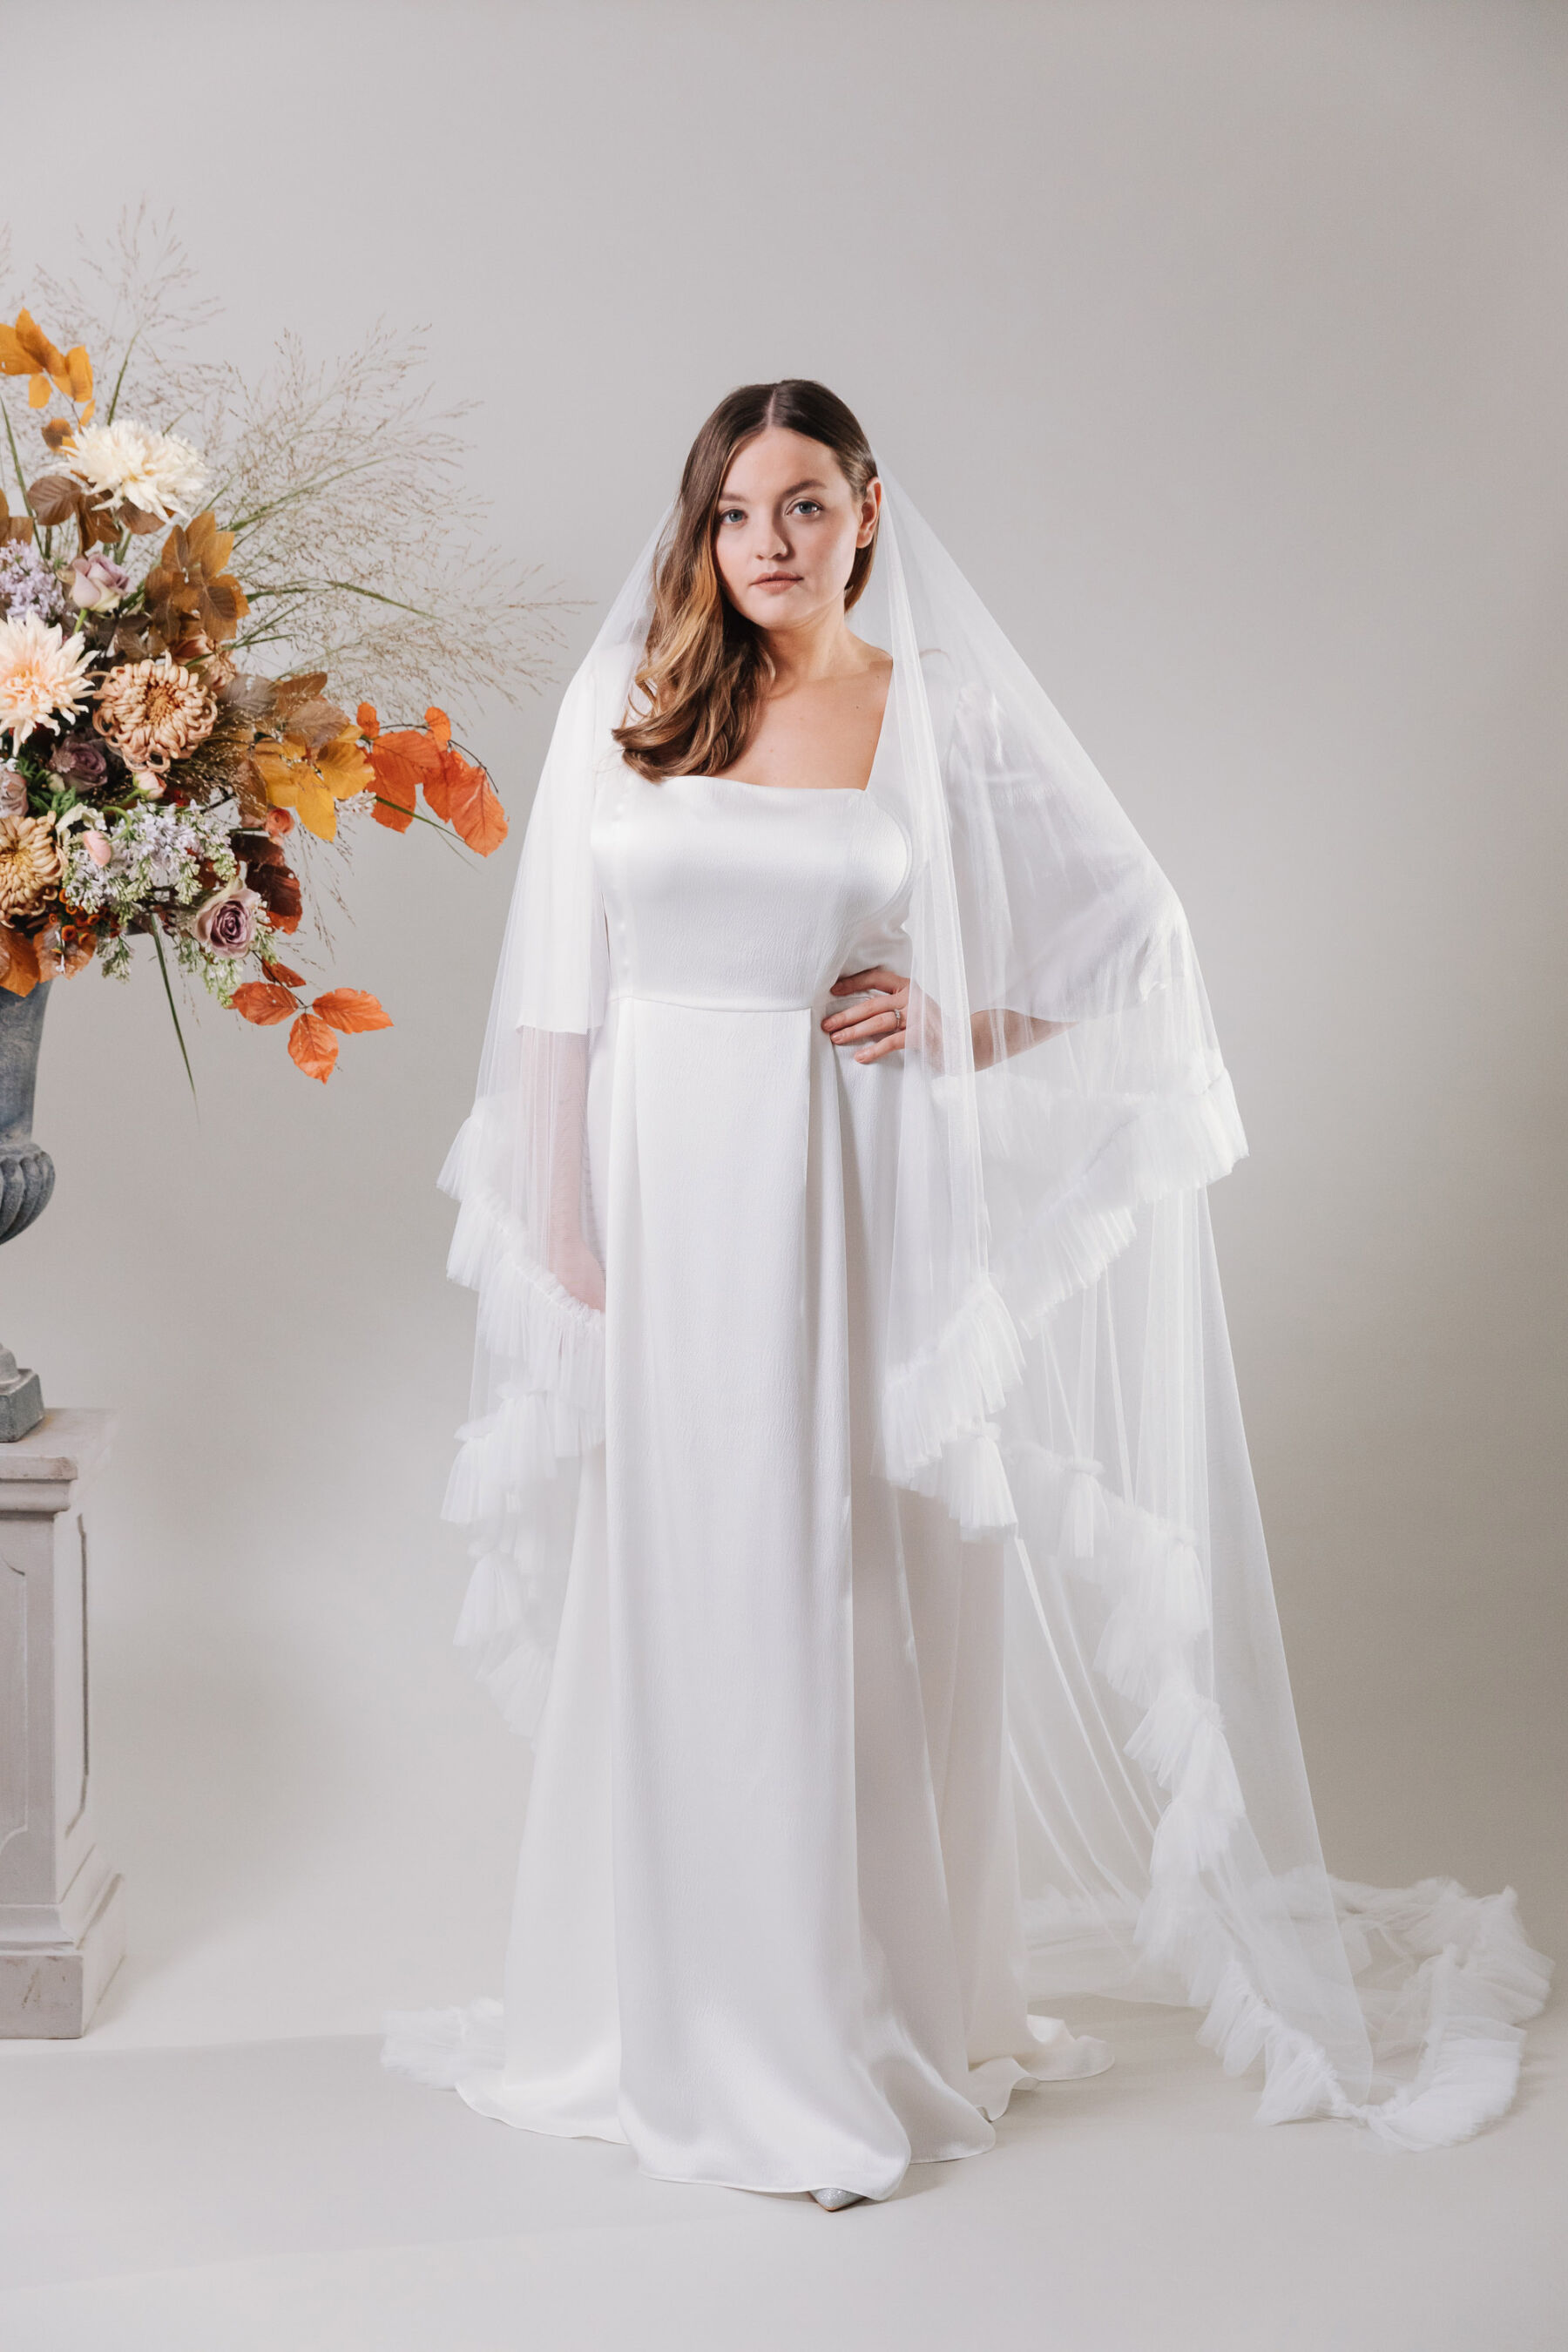 Plus size / curvy bride wedding dress and veil, by Kate Beaumont